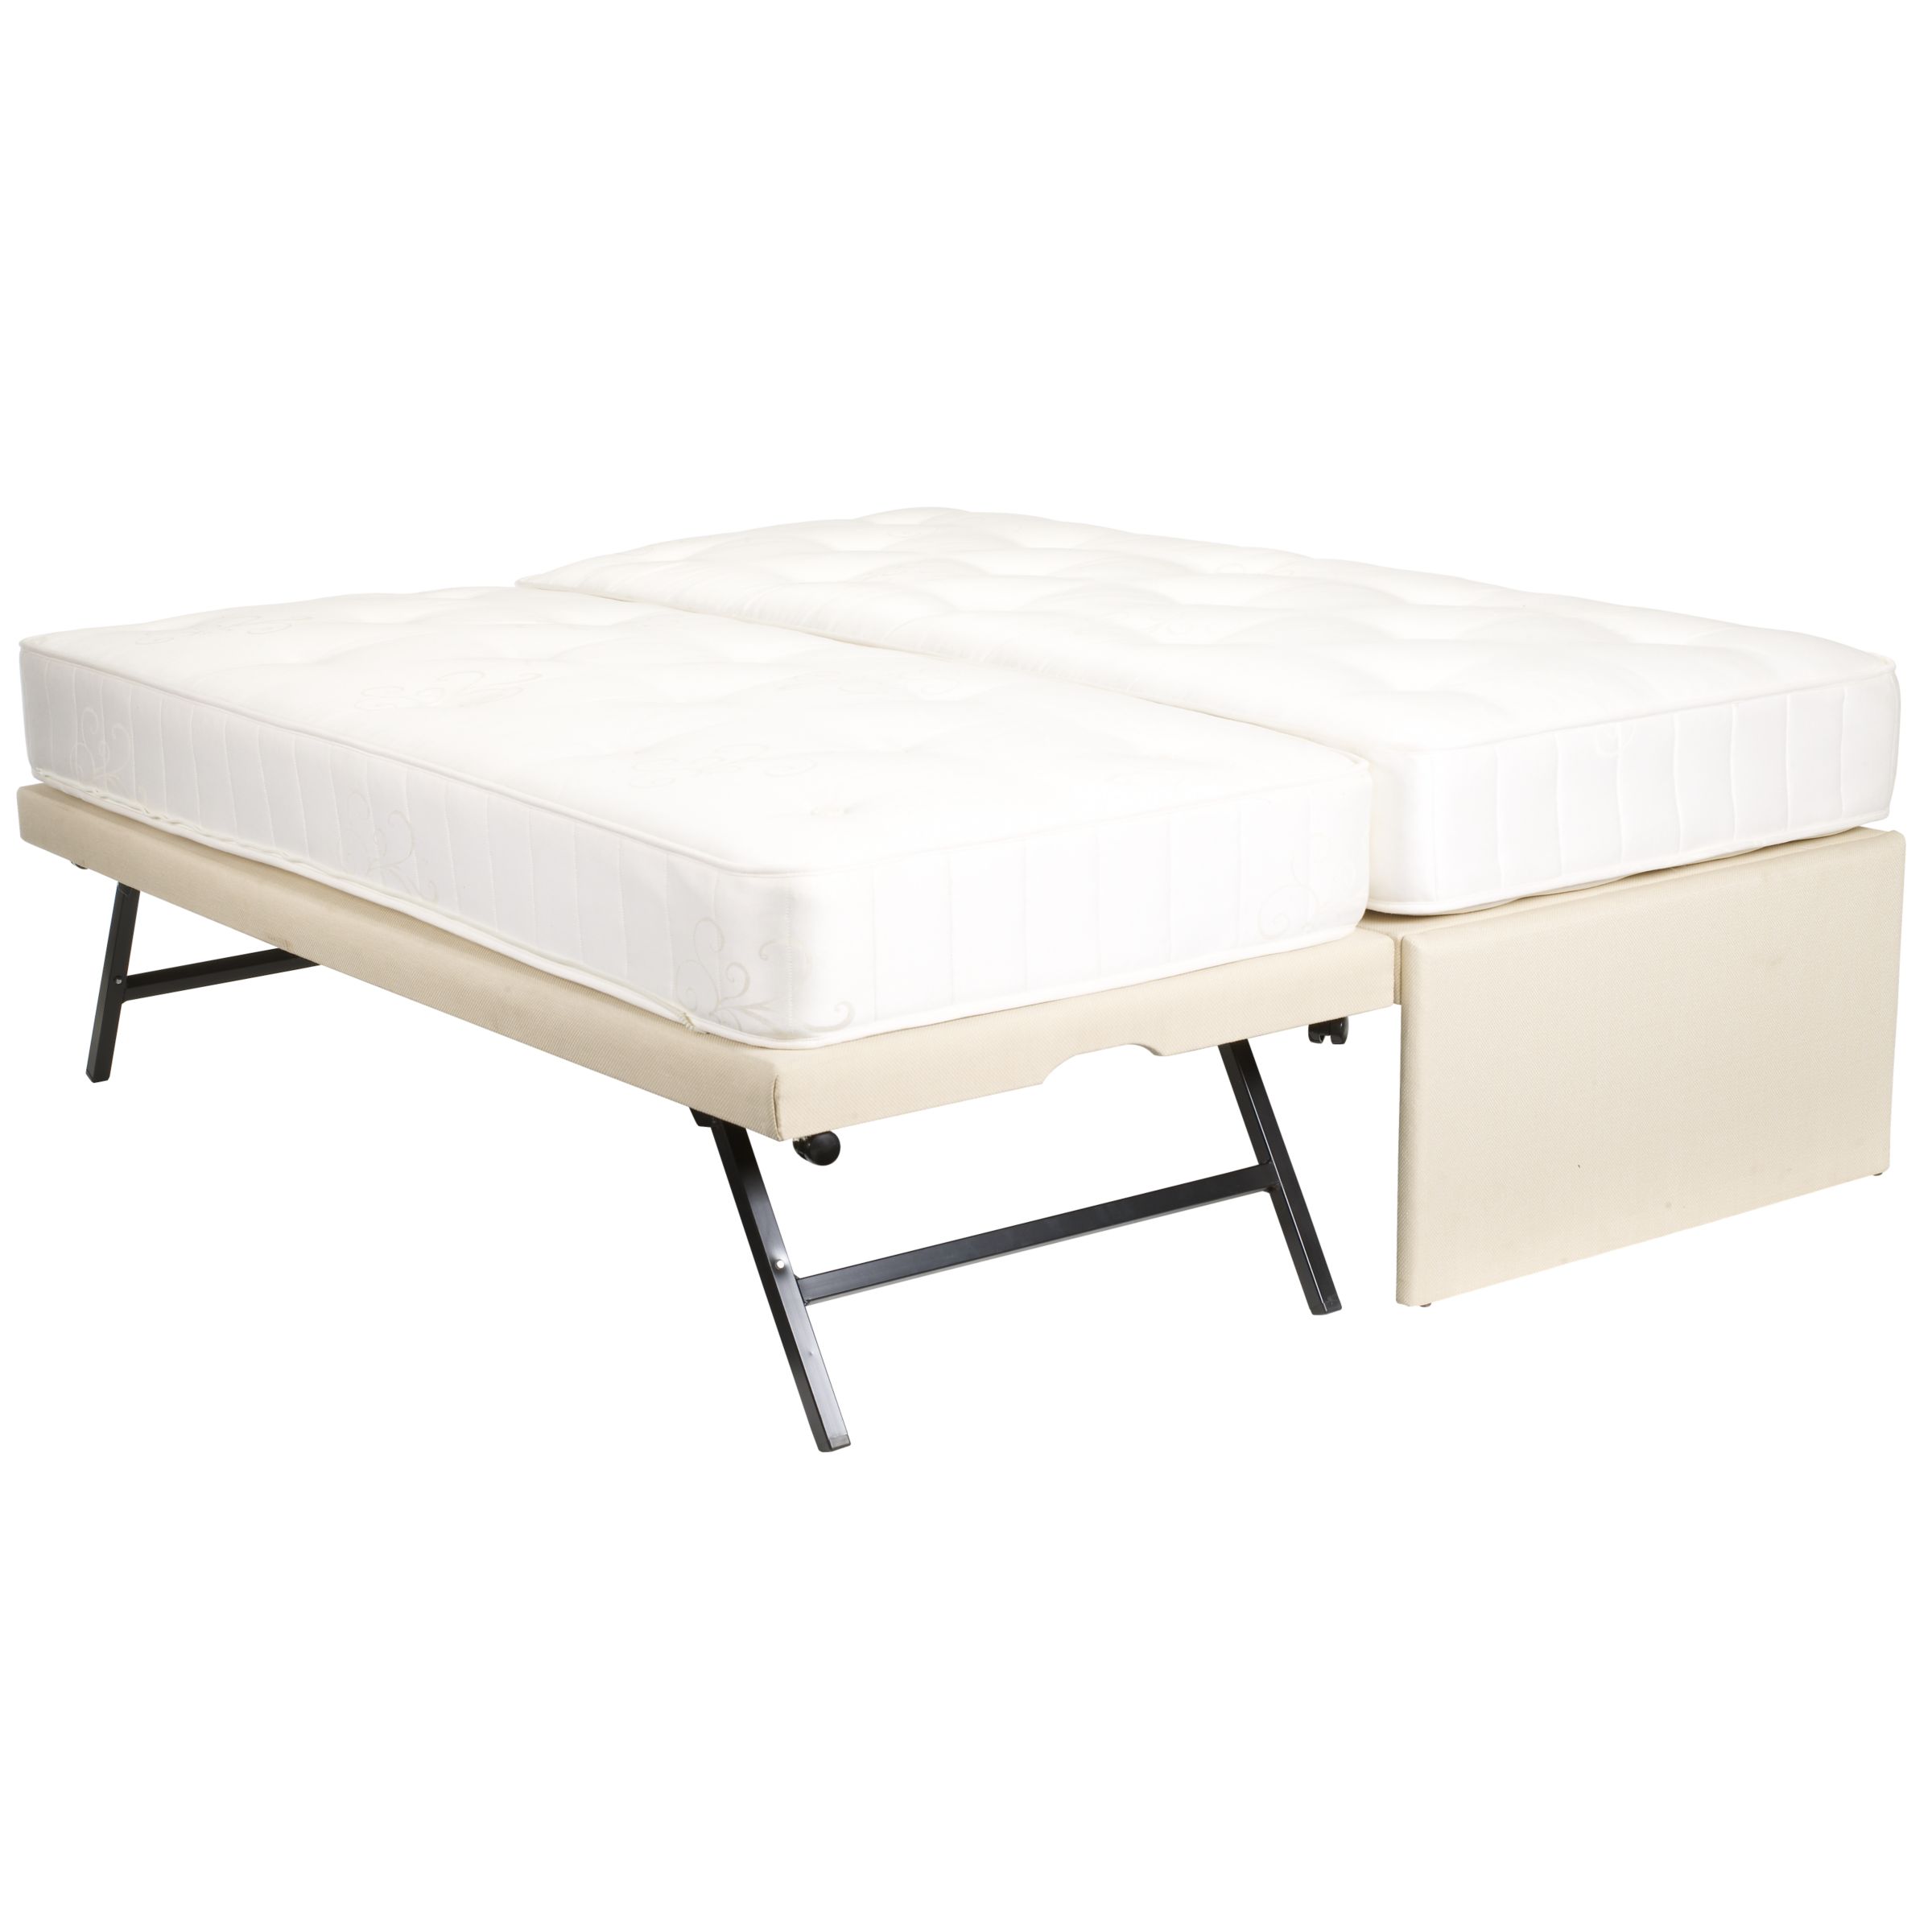 John Lewis Newton Guest Bed with Mattresses,